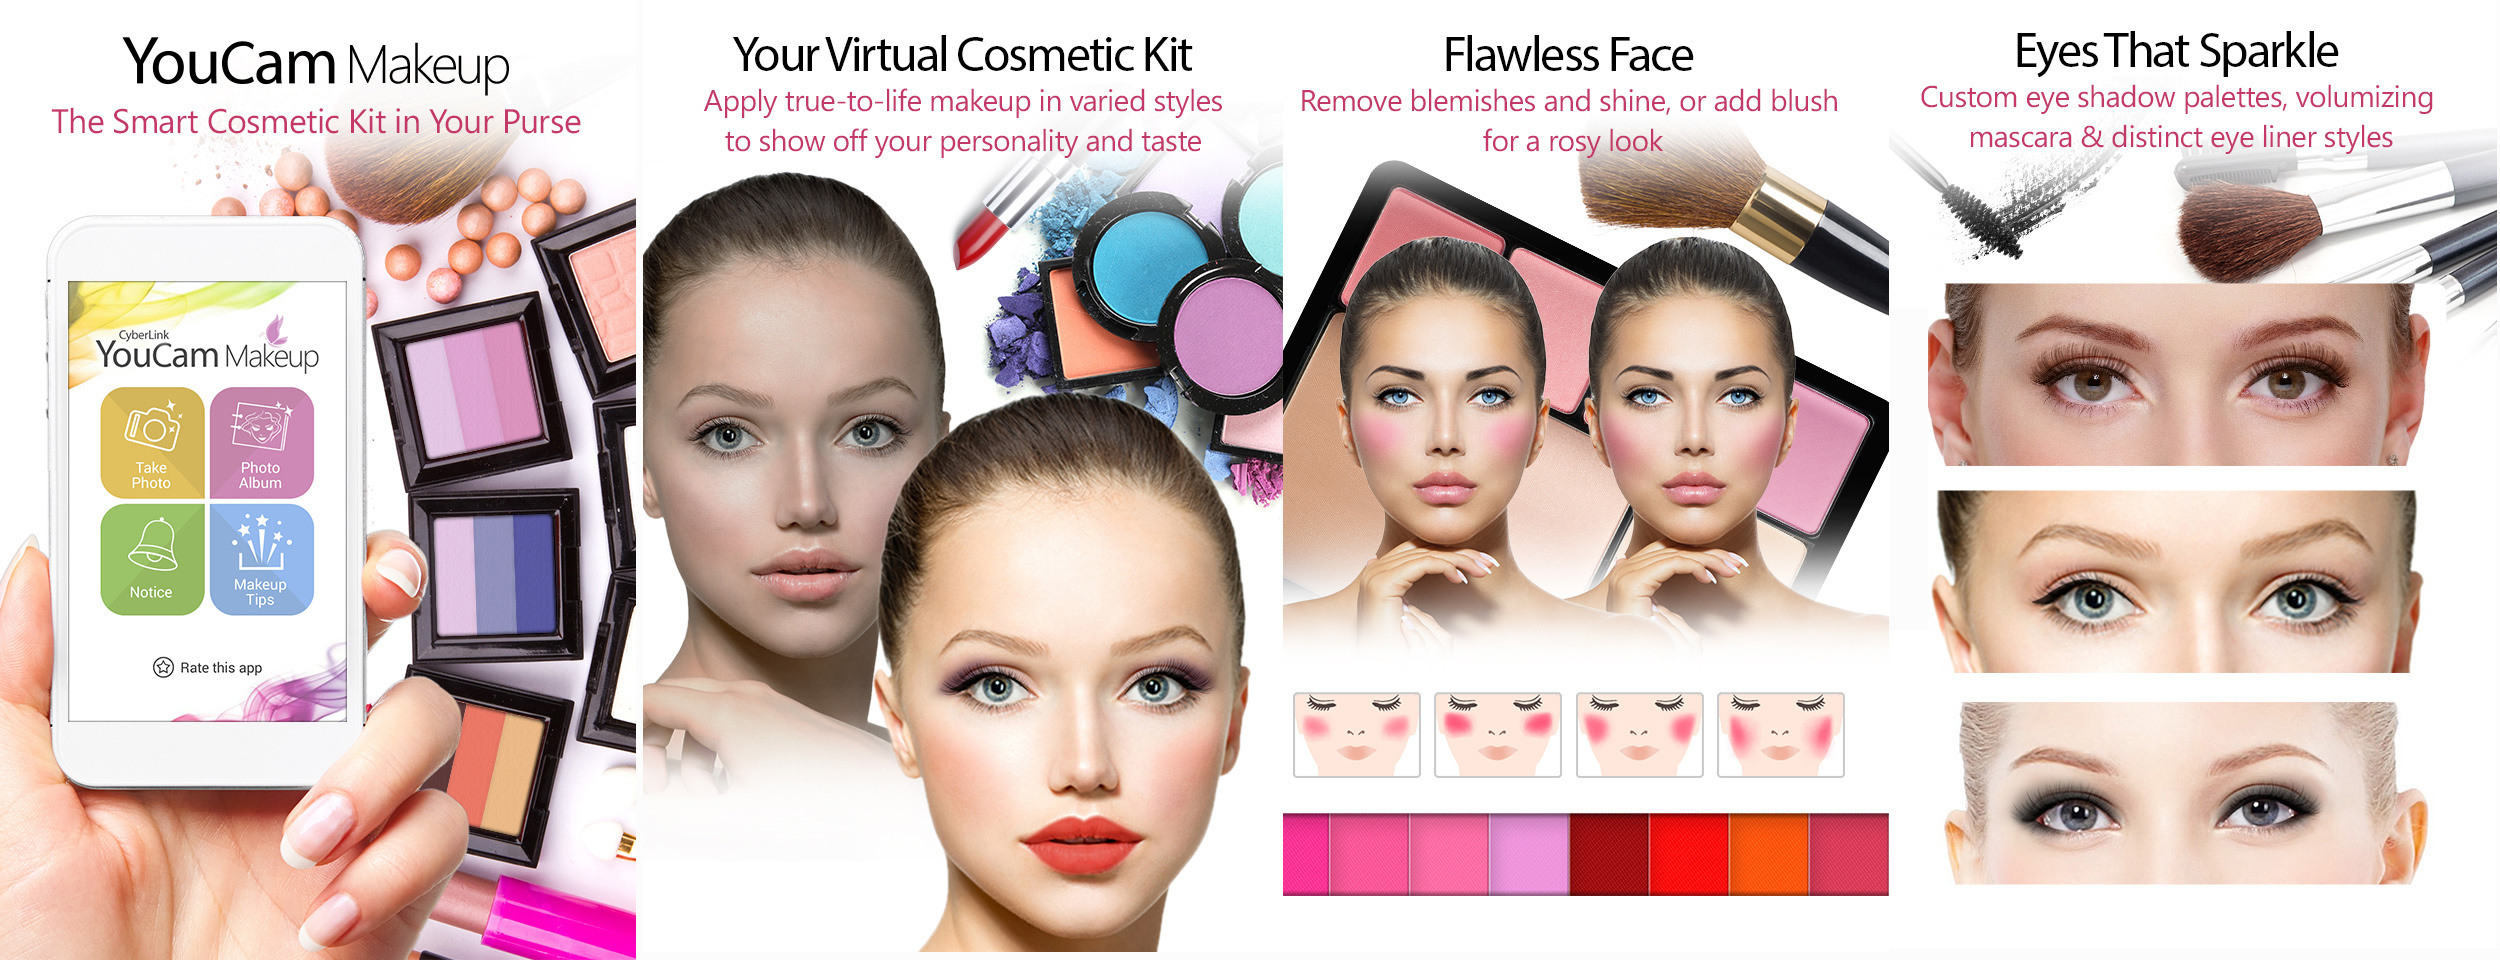 Cyberlink Announces New Youcam Makeup App The Smart Cosmetic Kit In Your Purse Business Wire